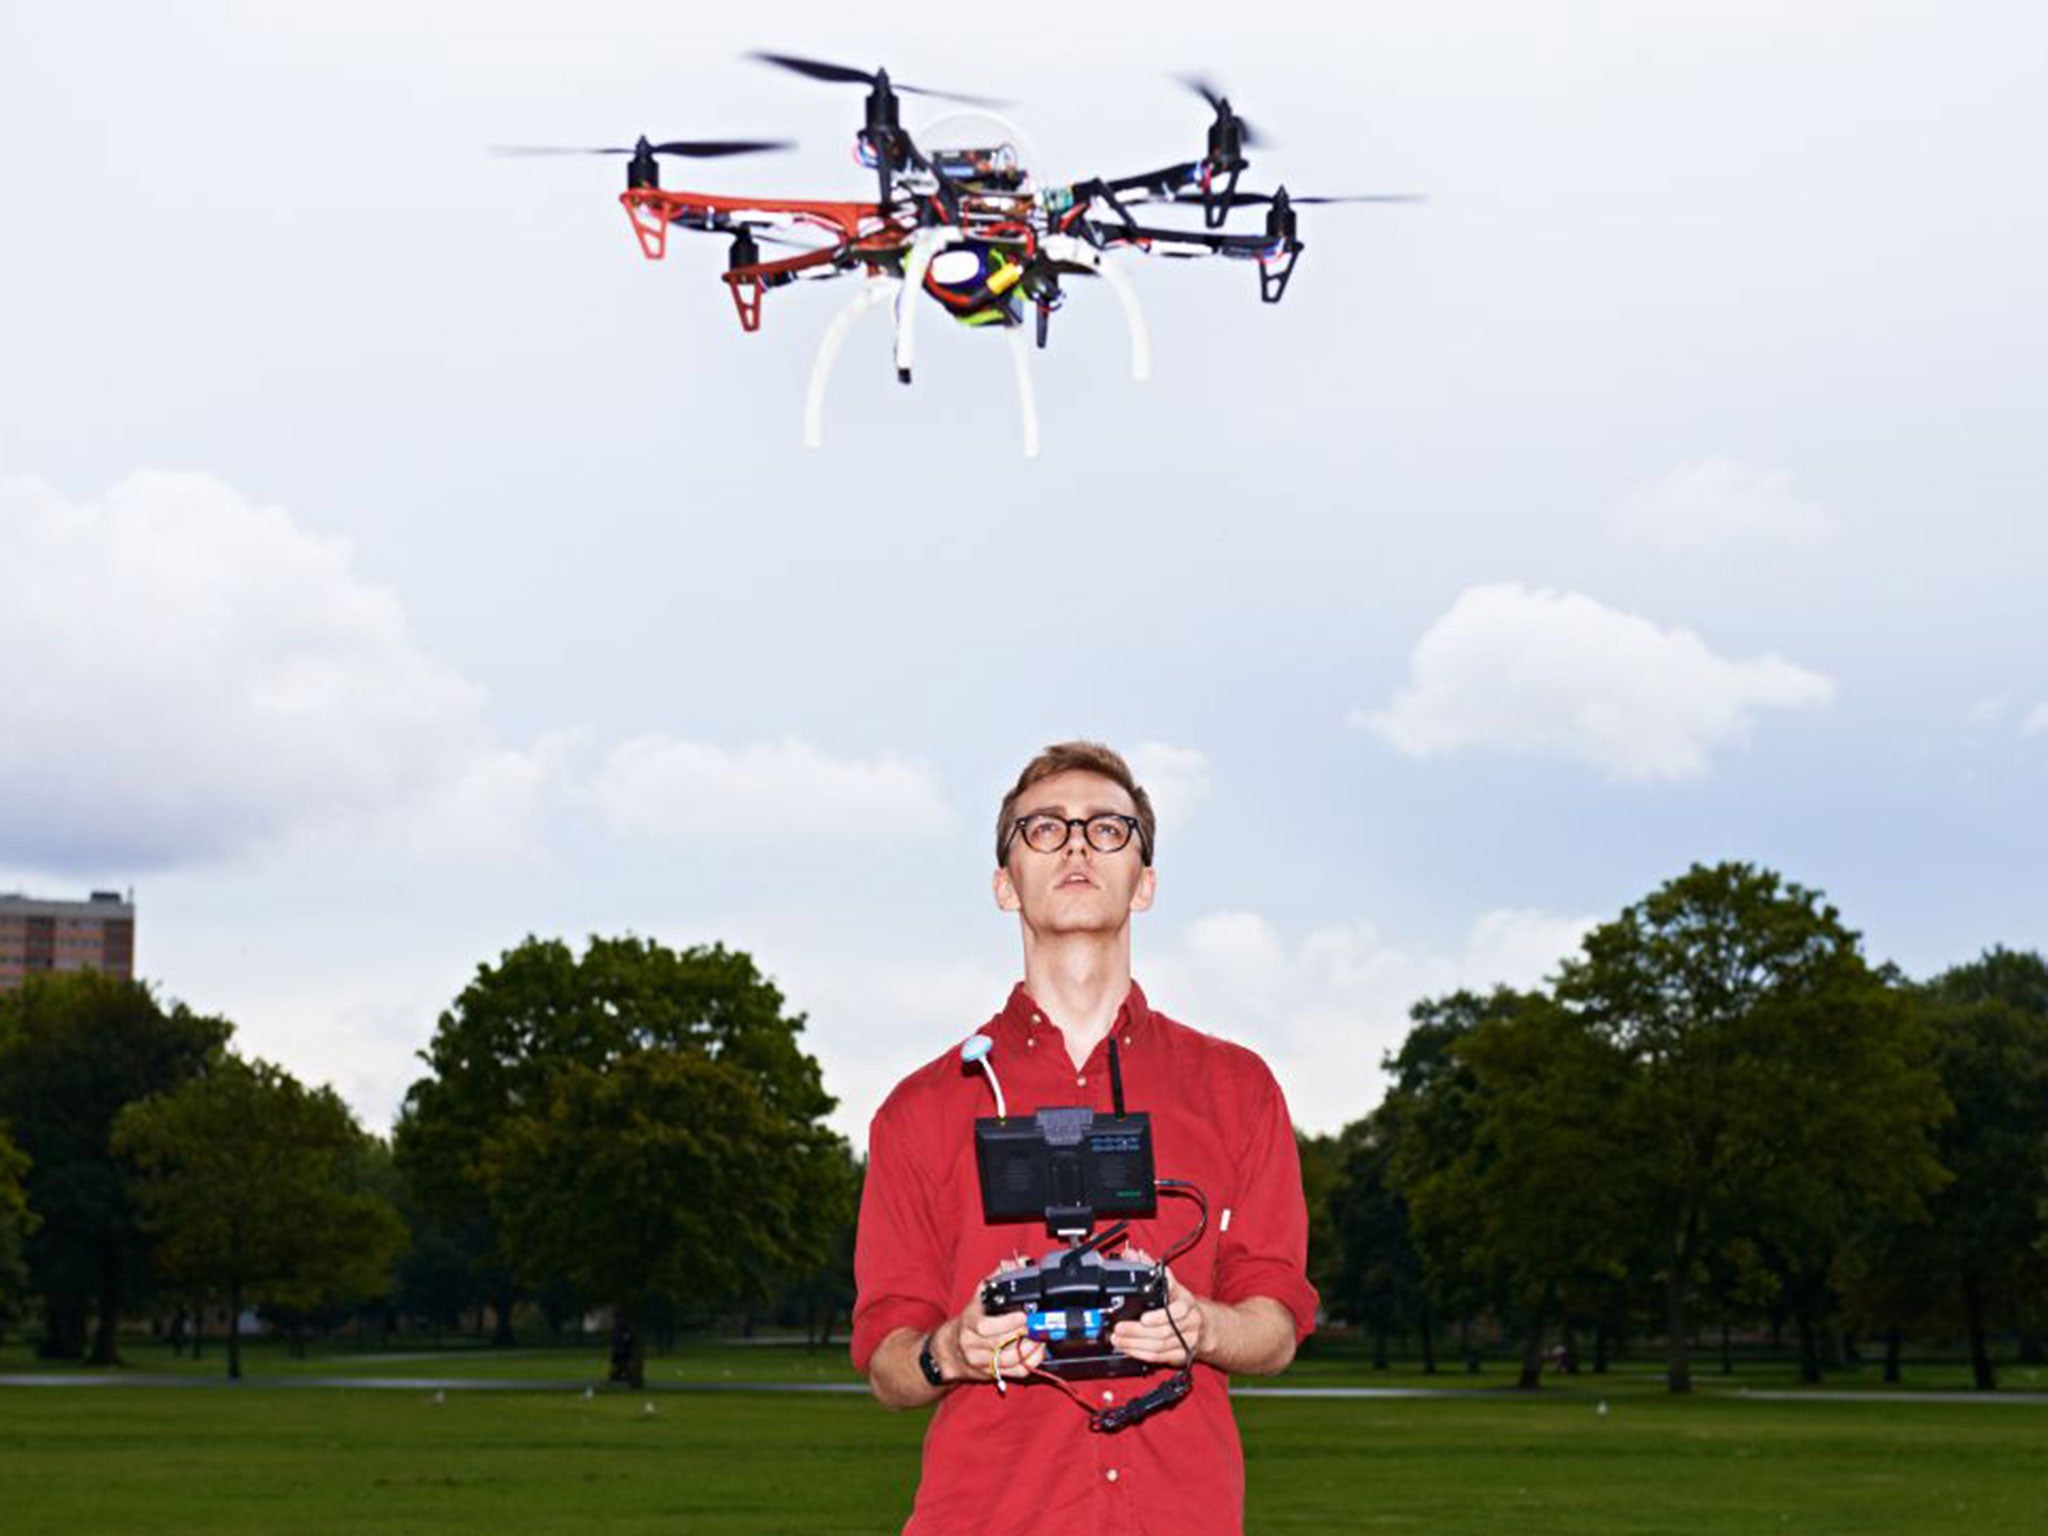 James Vincent, science and technology correspondent of The Independent, flies a F550HEX drone in Victoria Park, east London, last month